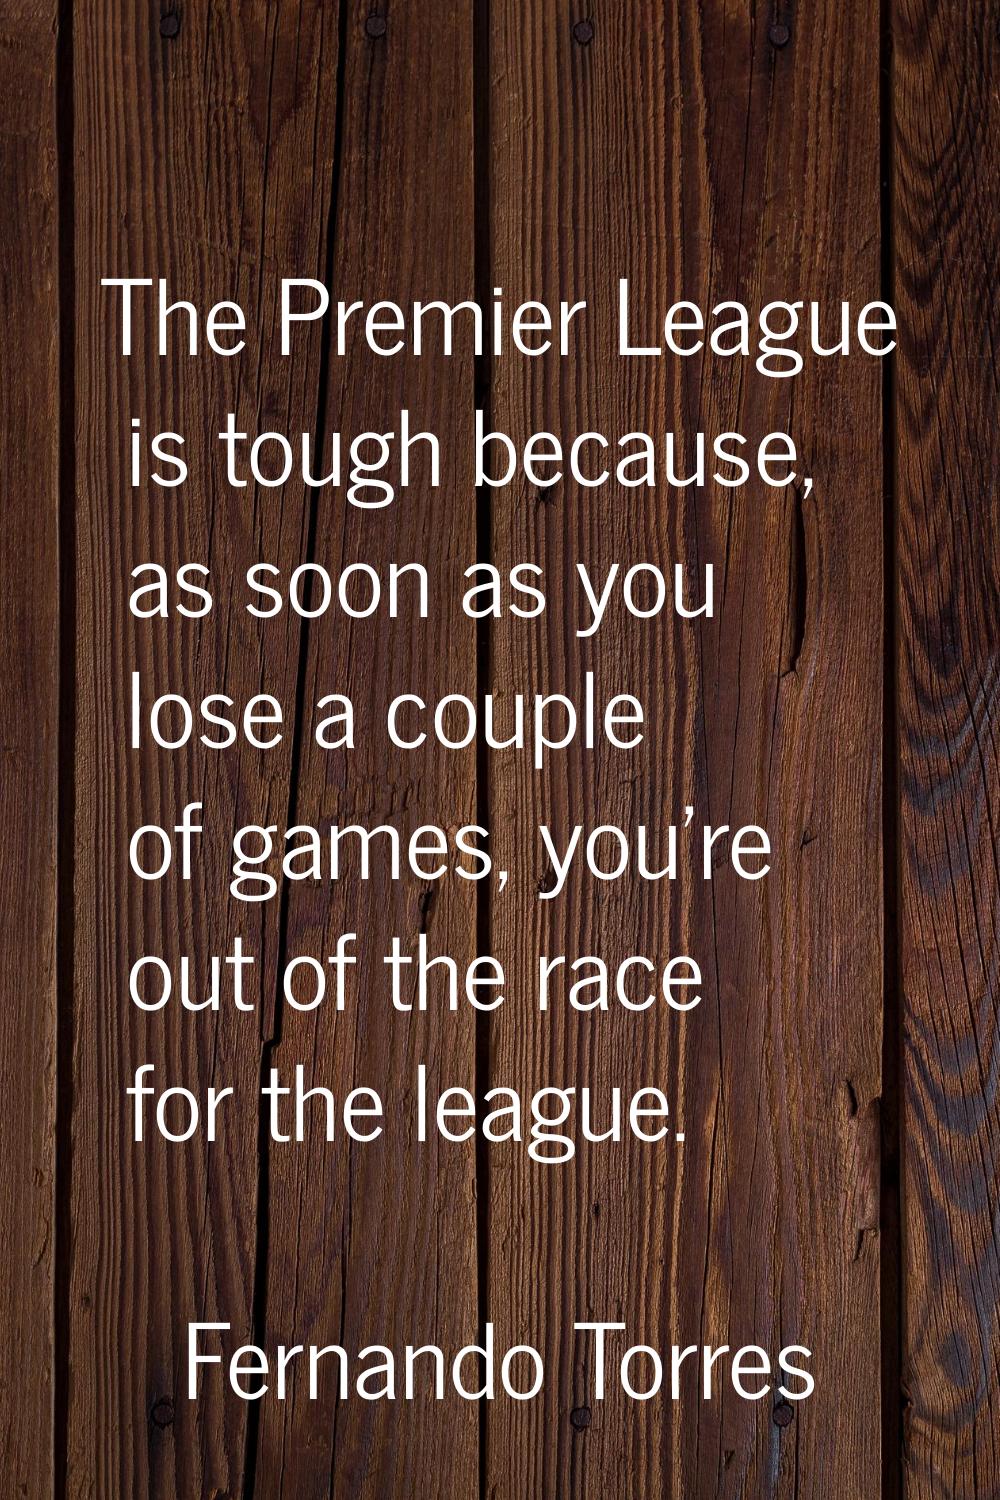 The Premier League is tough because, as soon as you lose a couple of games, you're out of the race 